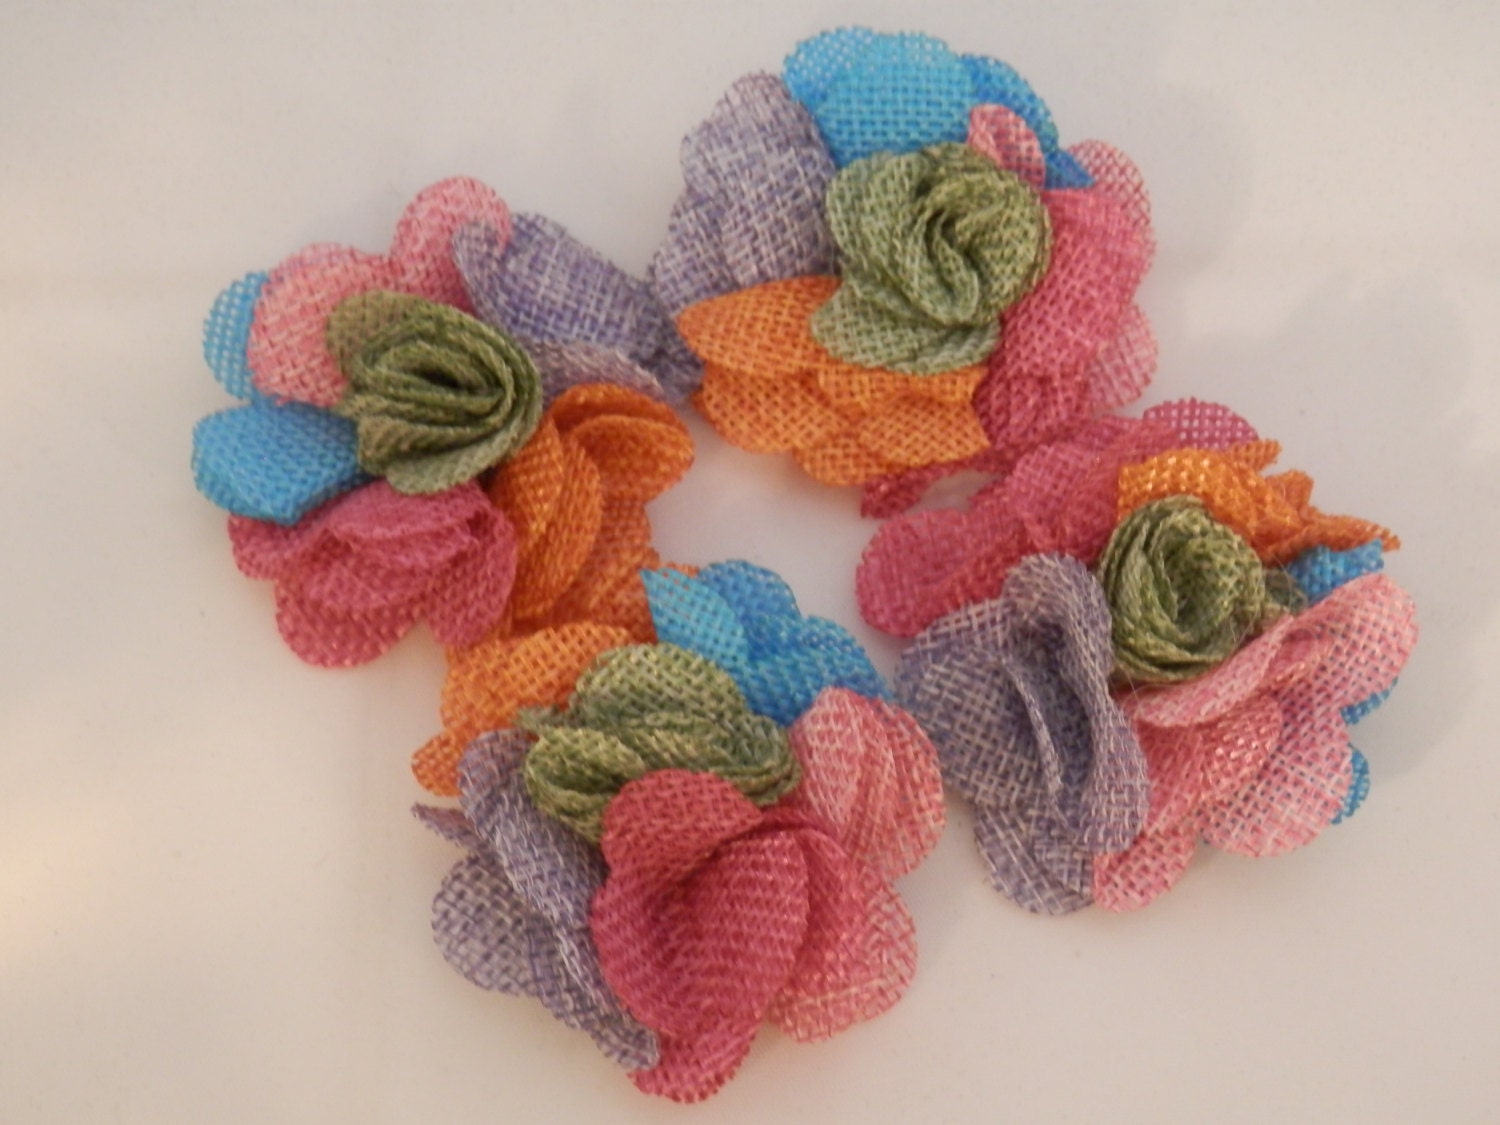 Set of 6 Pcs 2.5" Burlap Flowers - Rainbow with Green Centers